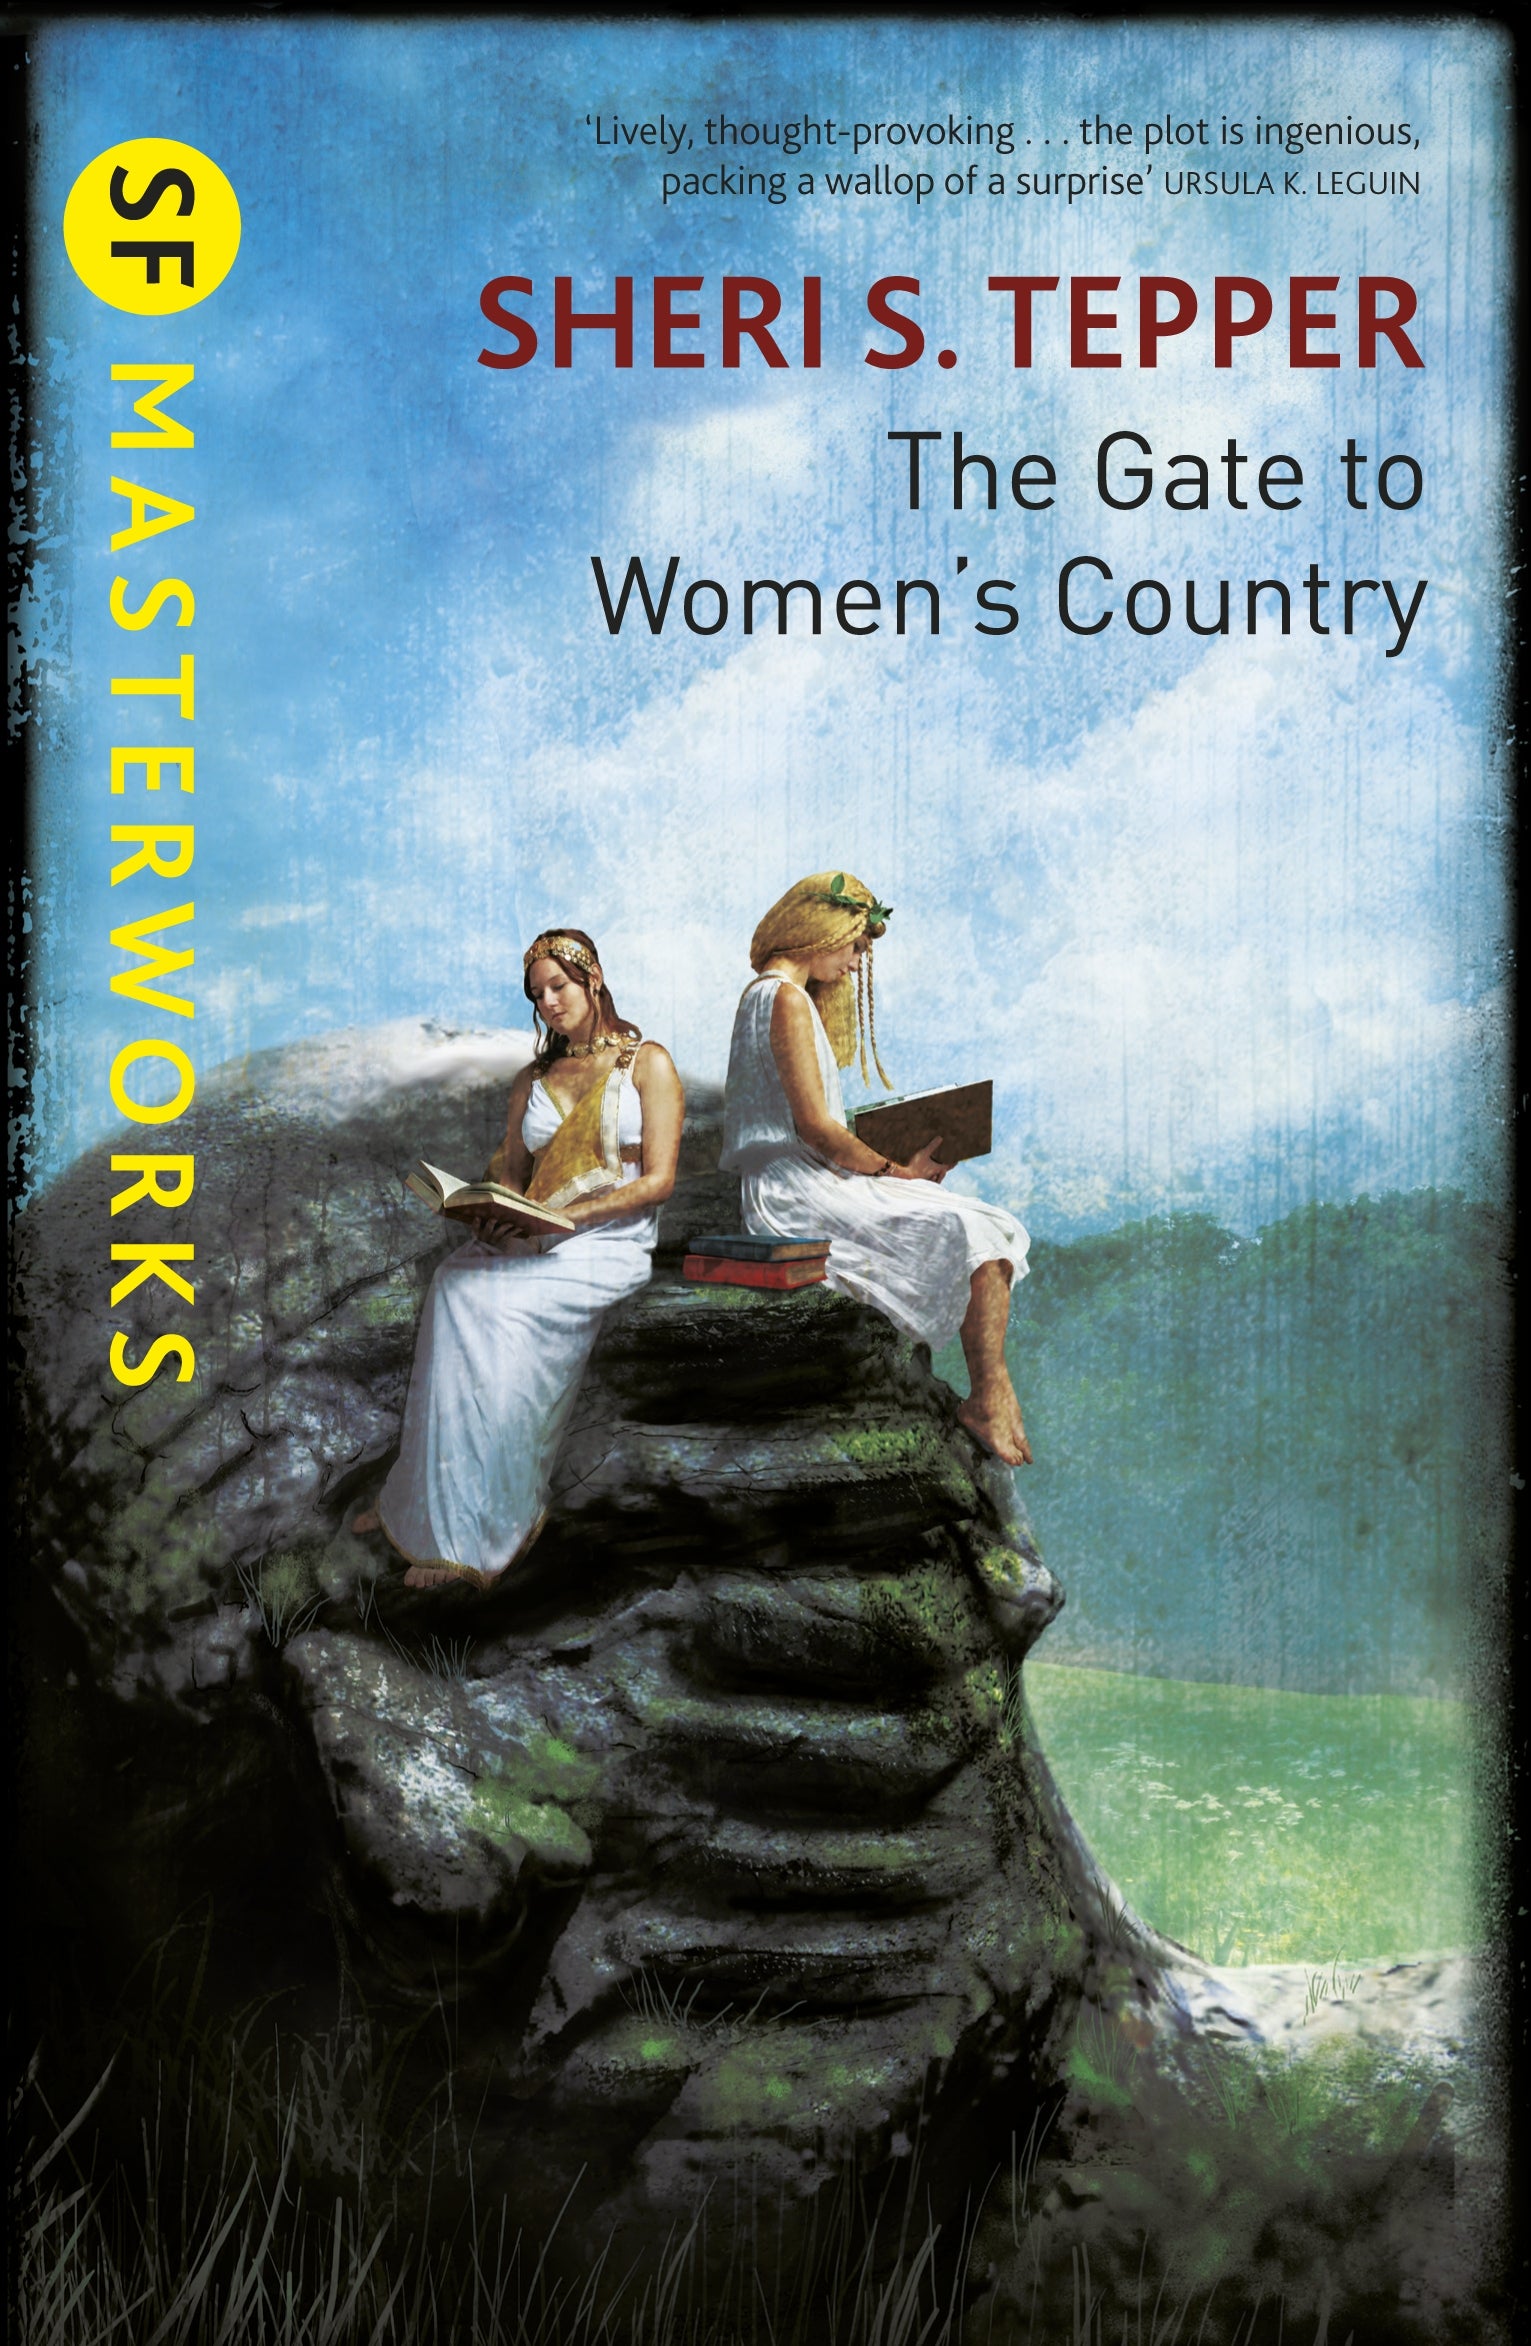 The Gate to Women's Country by Sheri S. Tepper